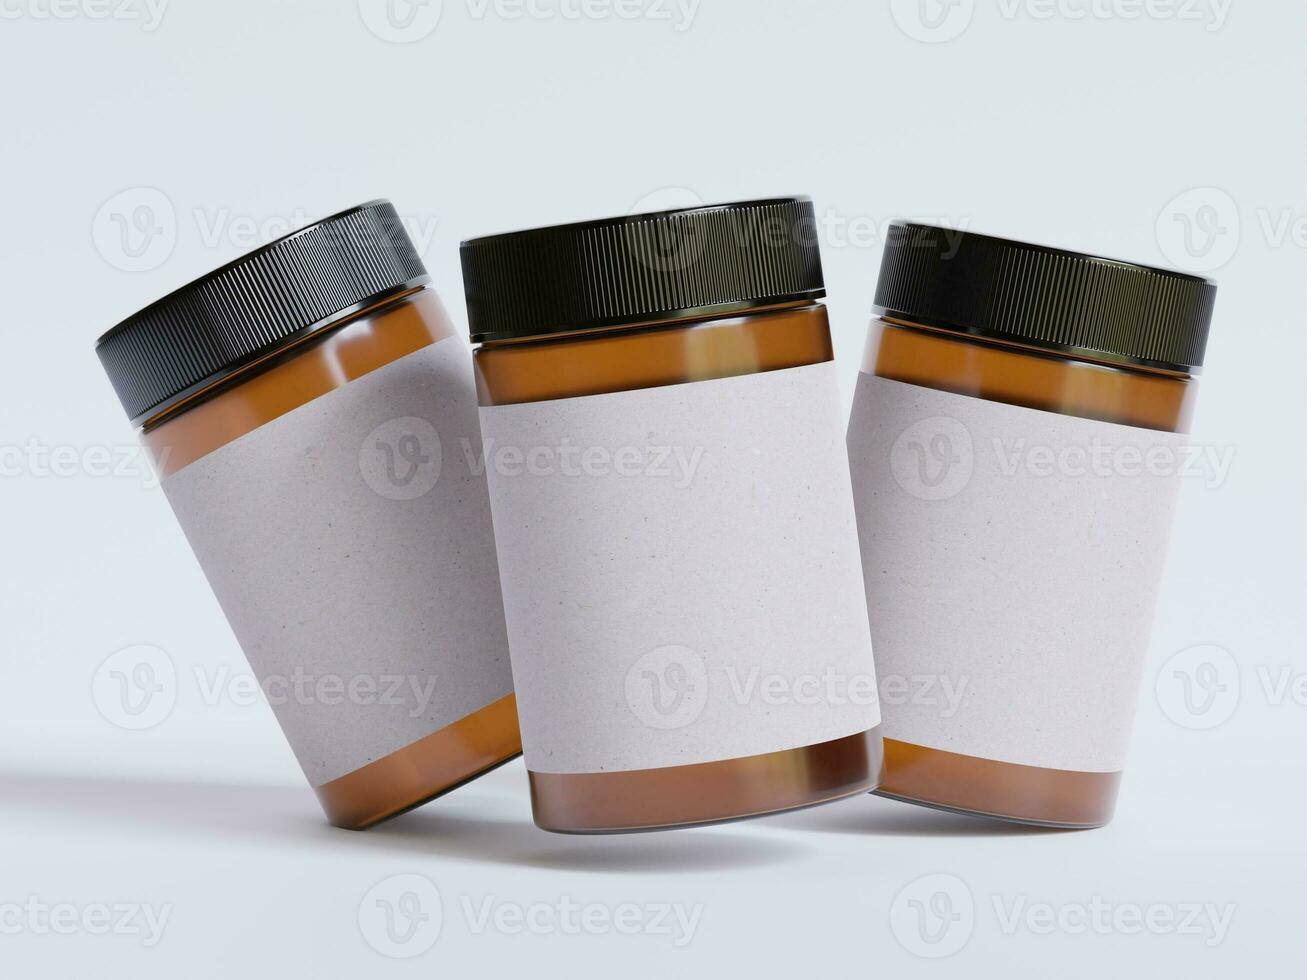 Amber Glass Cosmetic Jar with a realistic texture blank Label white color rendering 3D photo